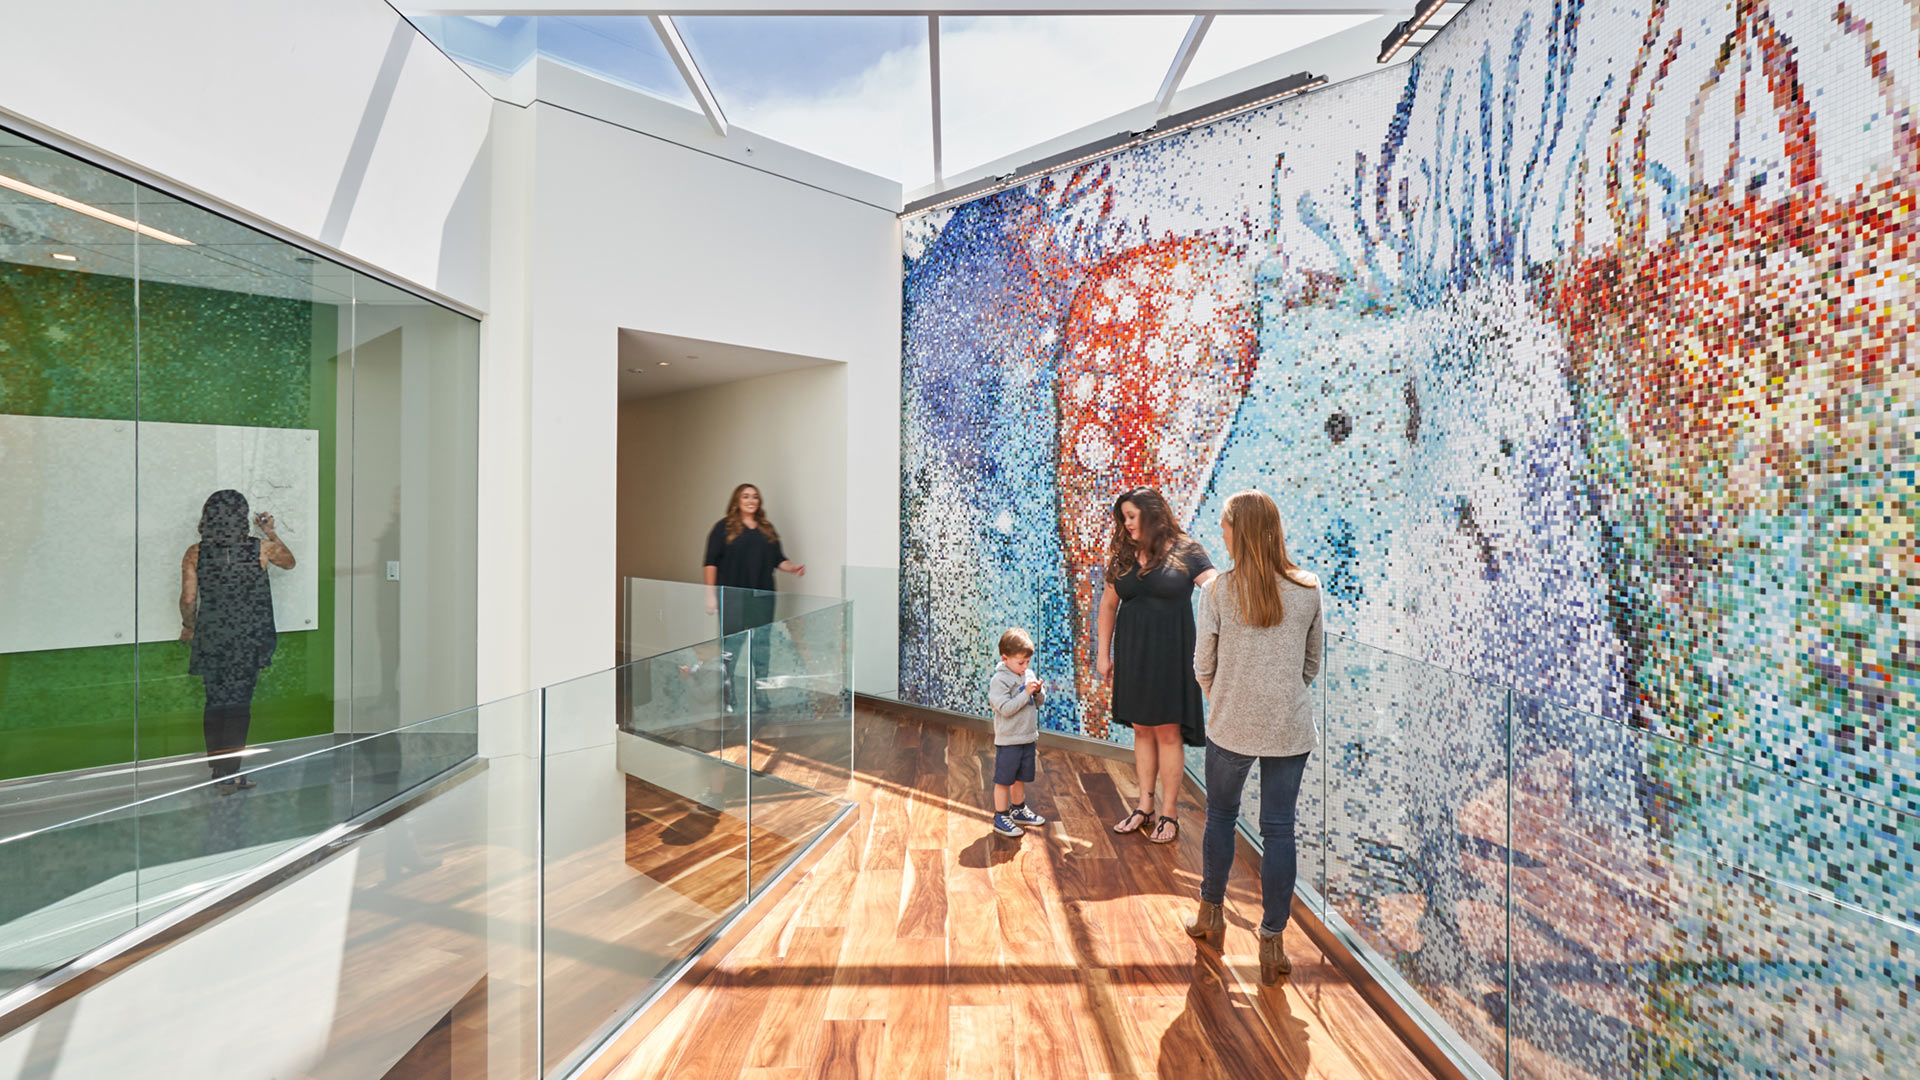 Interior at Vertex Pharmaceuticals life science facility, circulation with large skylight, mosaic art wall feature, and people within the space